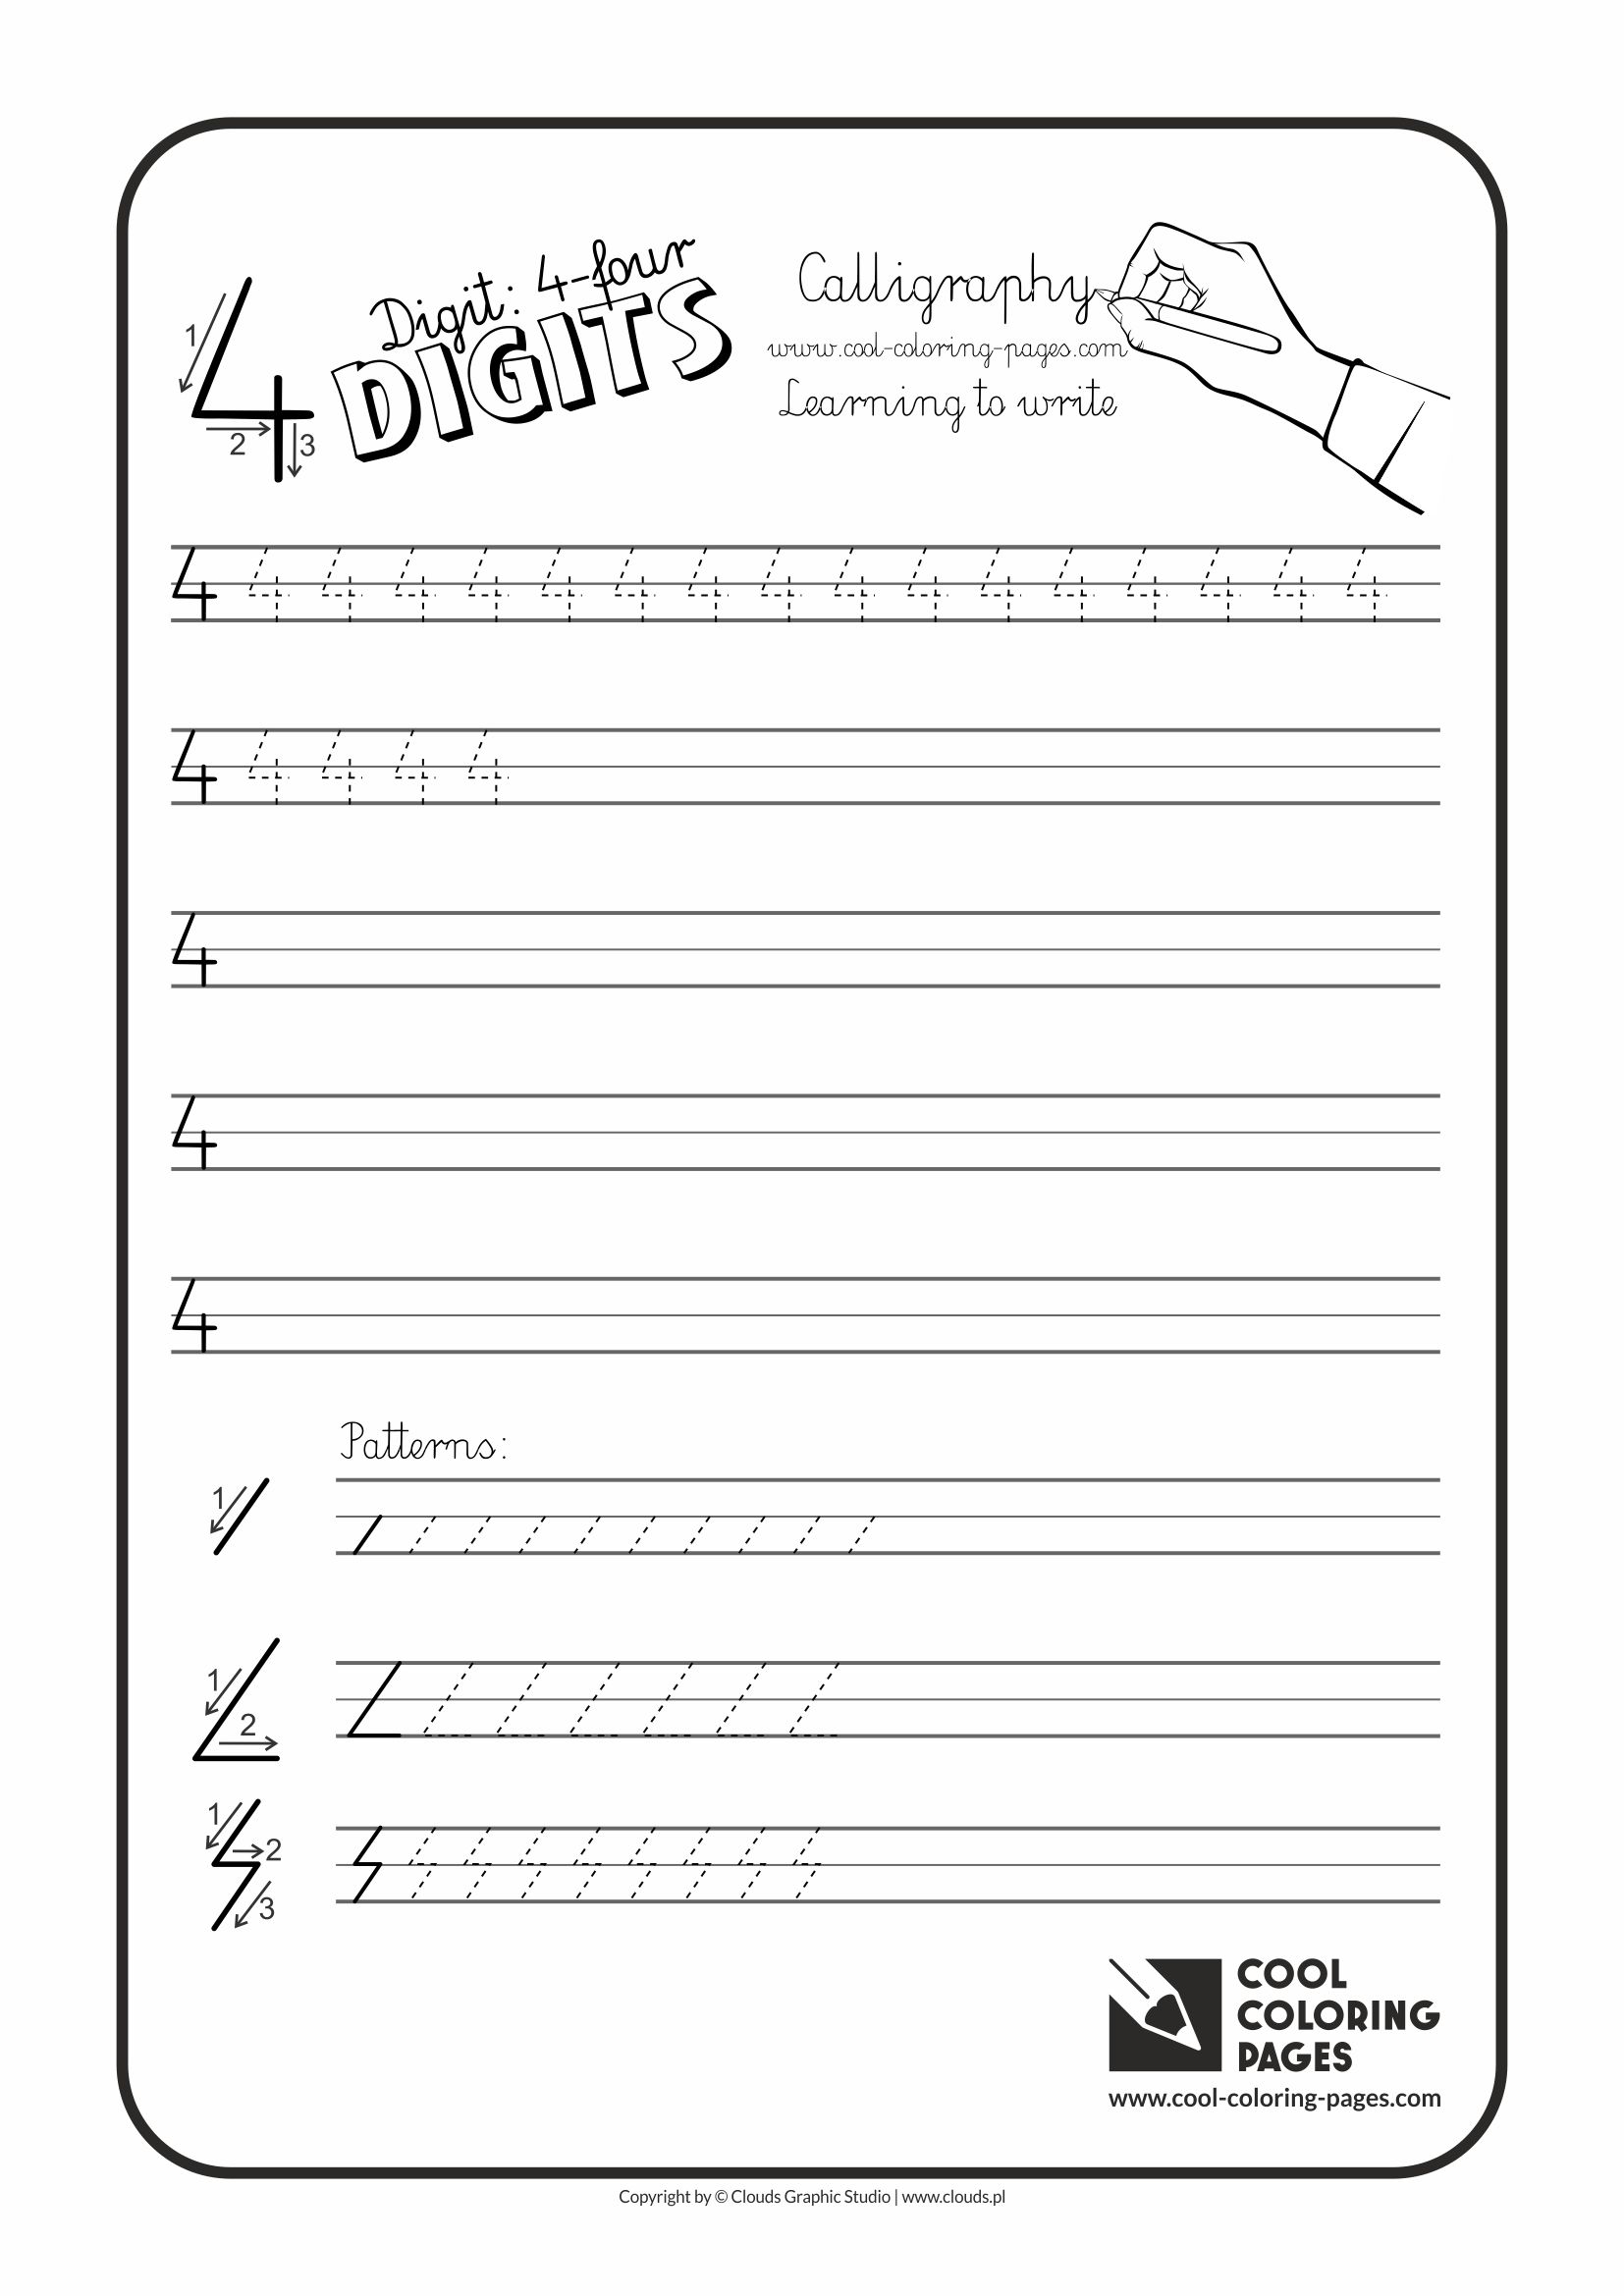 Cool Coloring Pages / Calligraphy / Digit 4 / Handwriting for kids